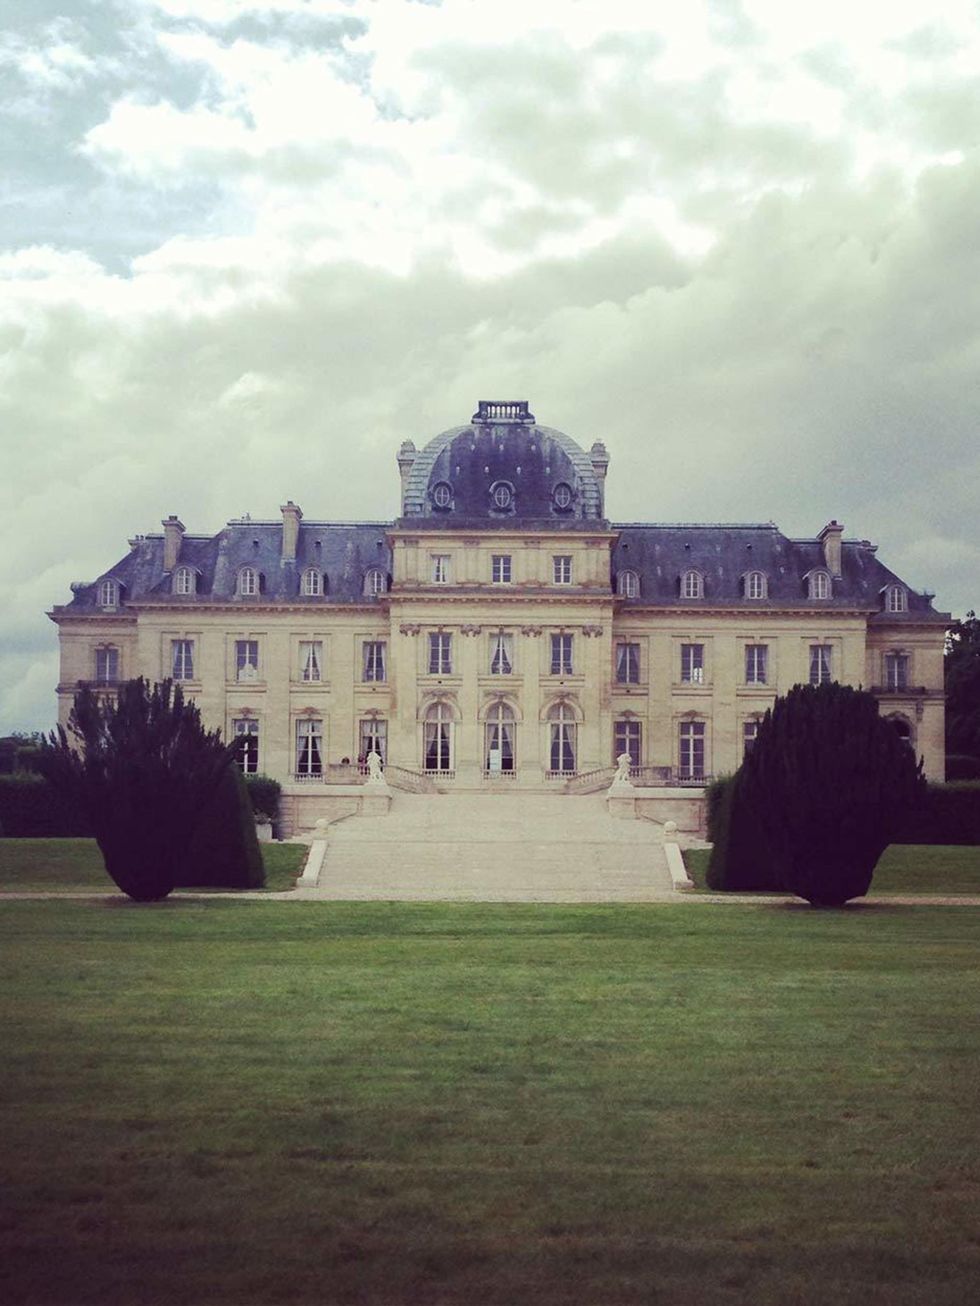 Our shoot location for the day - a ch&acirc;teau. Casual.